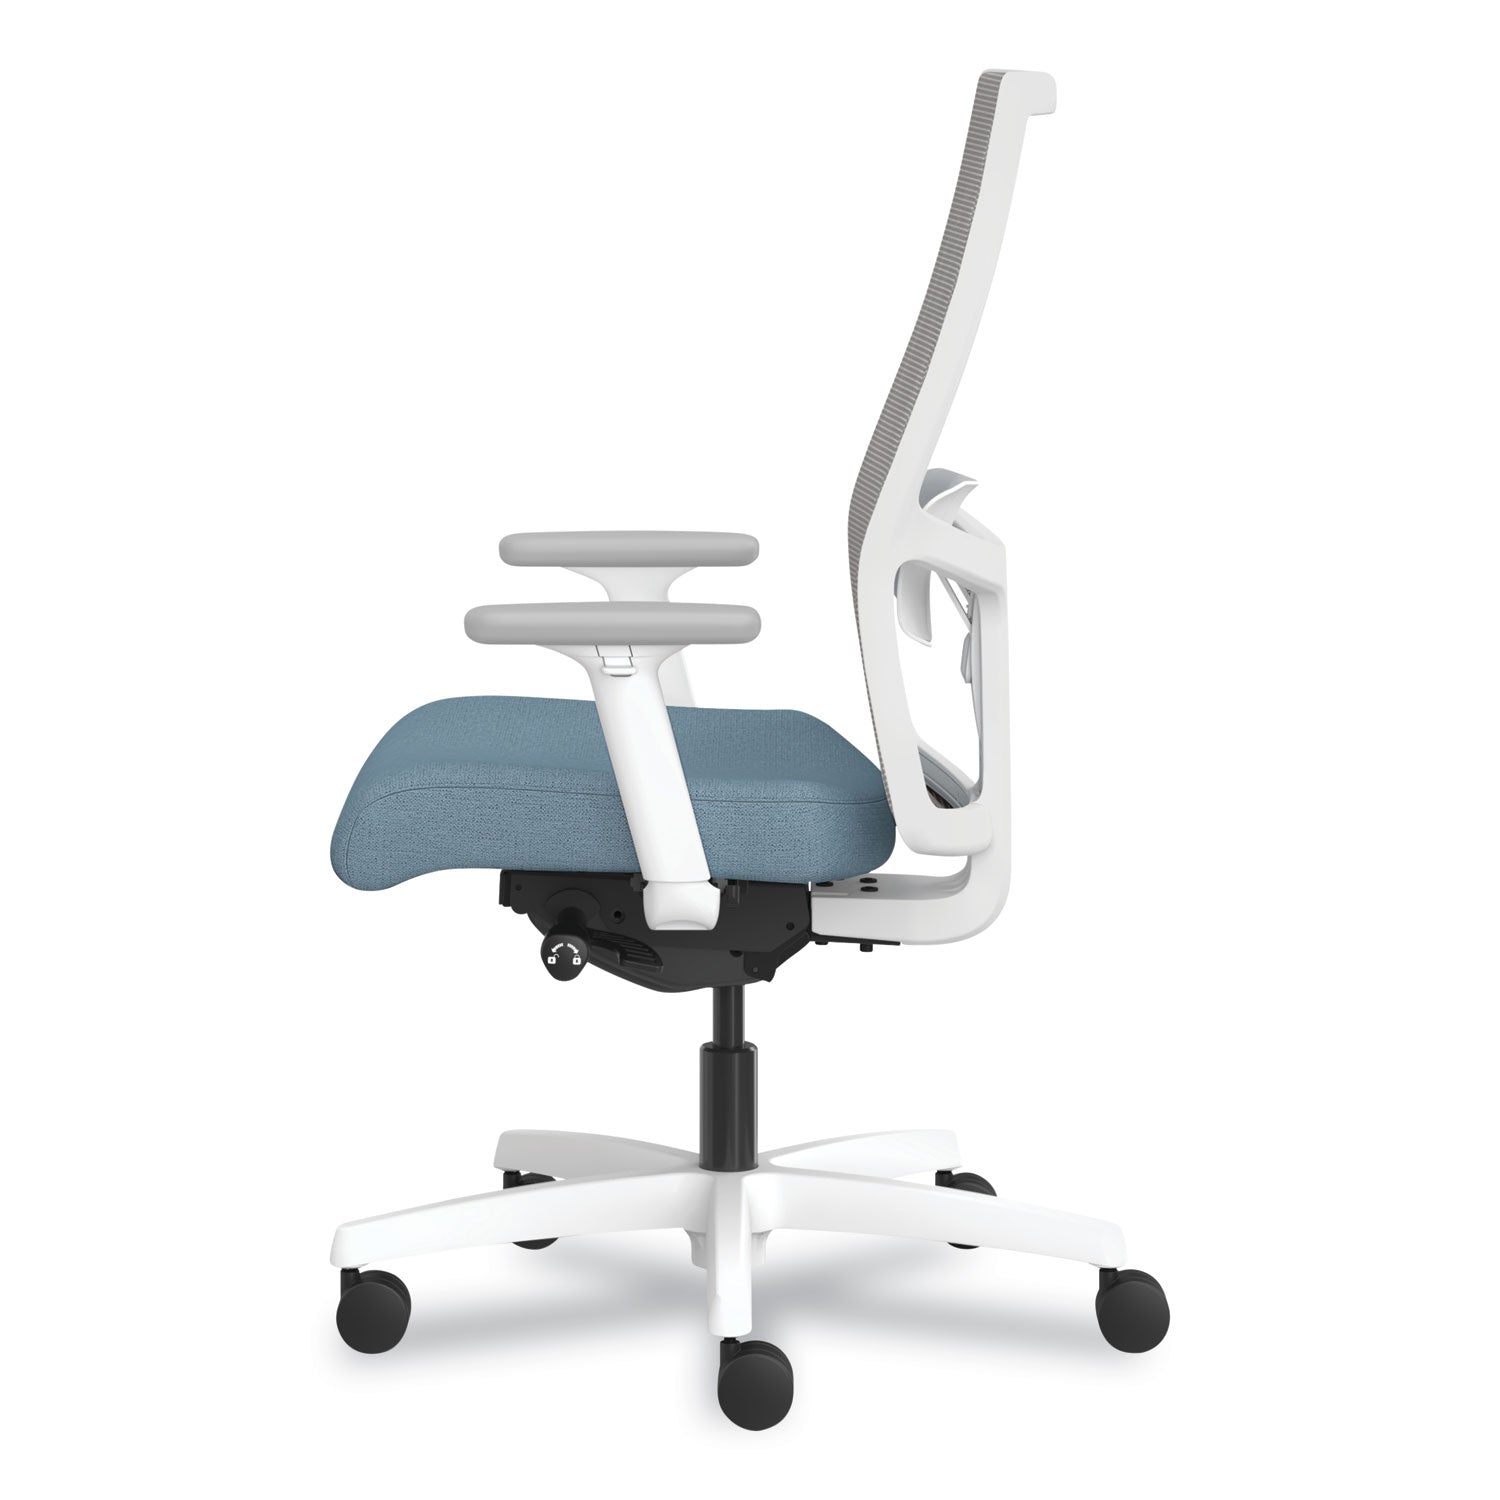 ignition-20-4-way-stretch-mid-back-mesh-task-chair-white-lumbar-support-carolina-fog-white-ships-in-7-10-business-days_honi2mm2afh21wx - 3